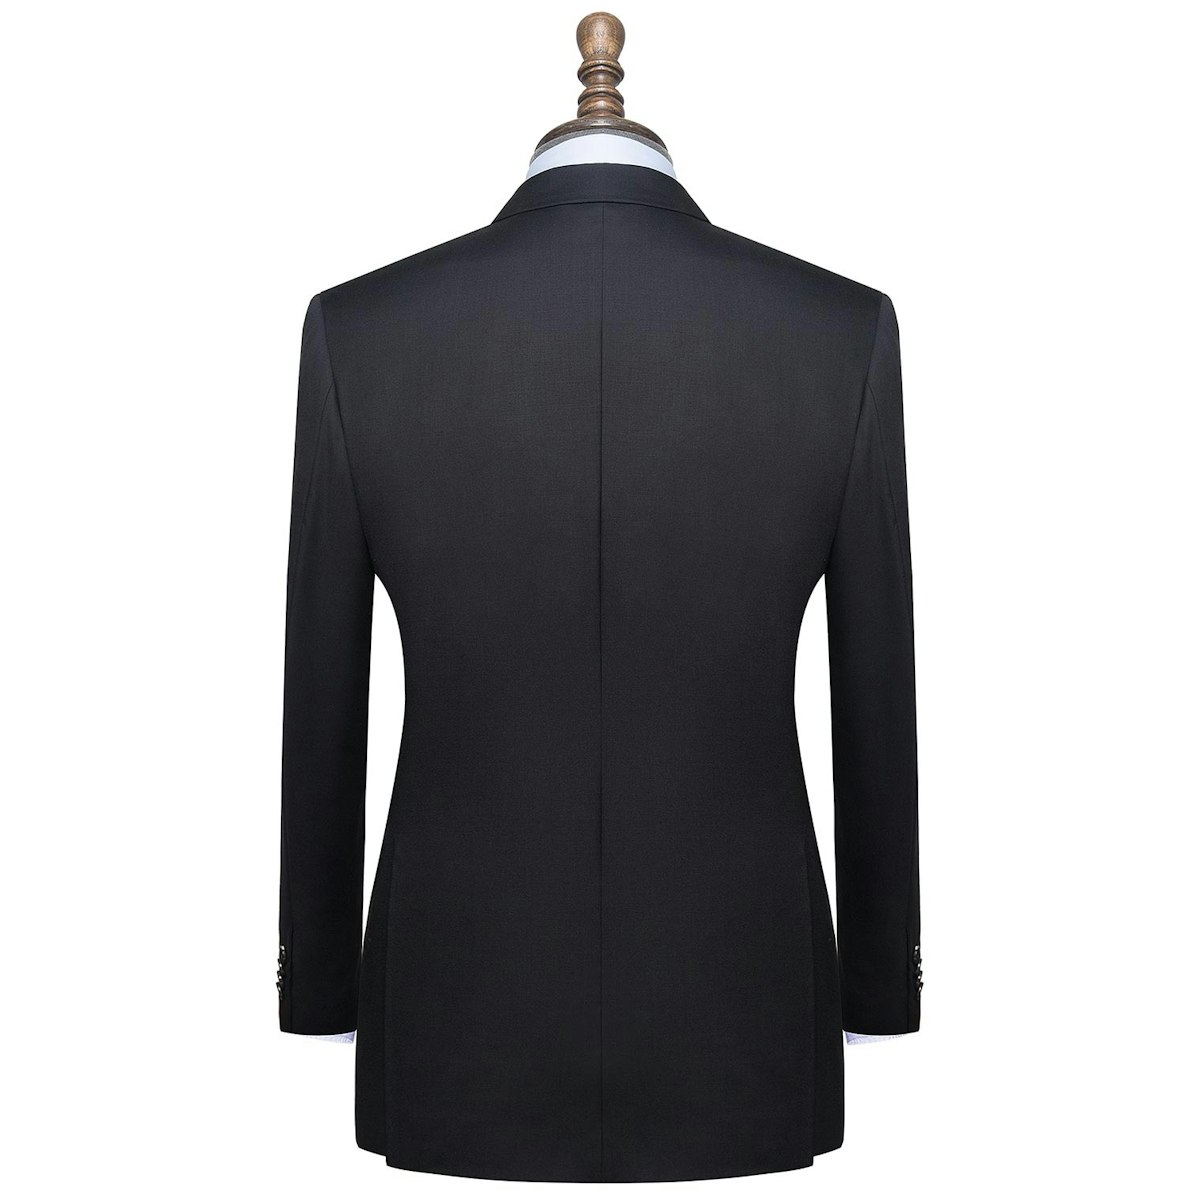 InStitchu Collection The Ramsay mens suit